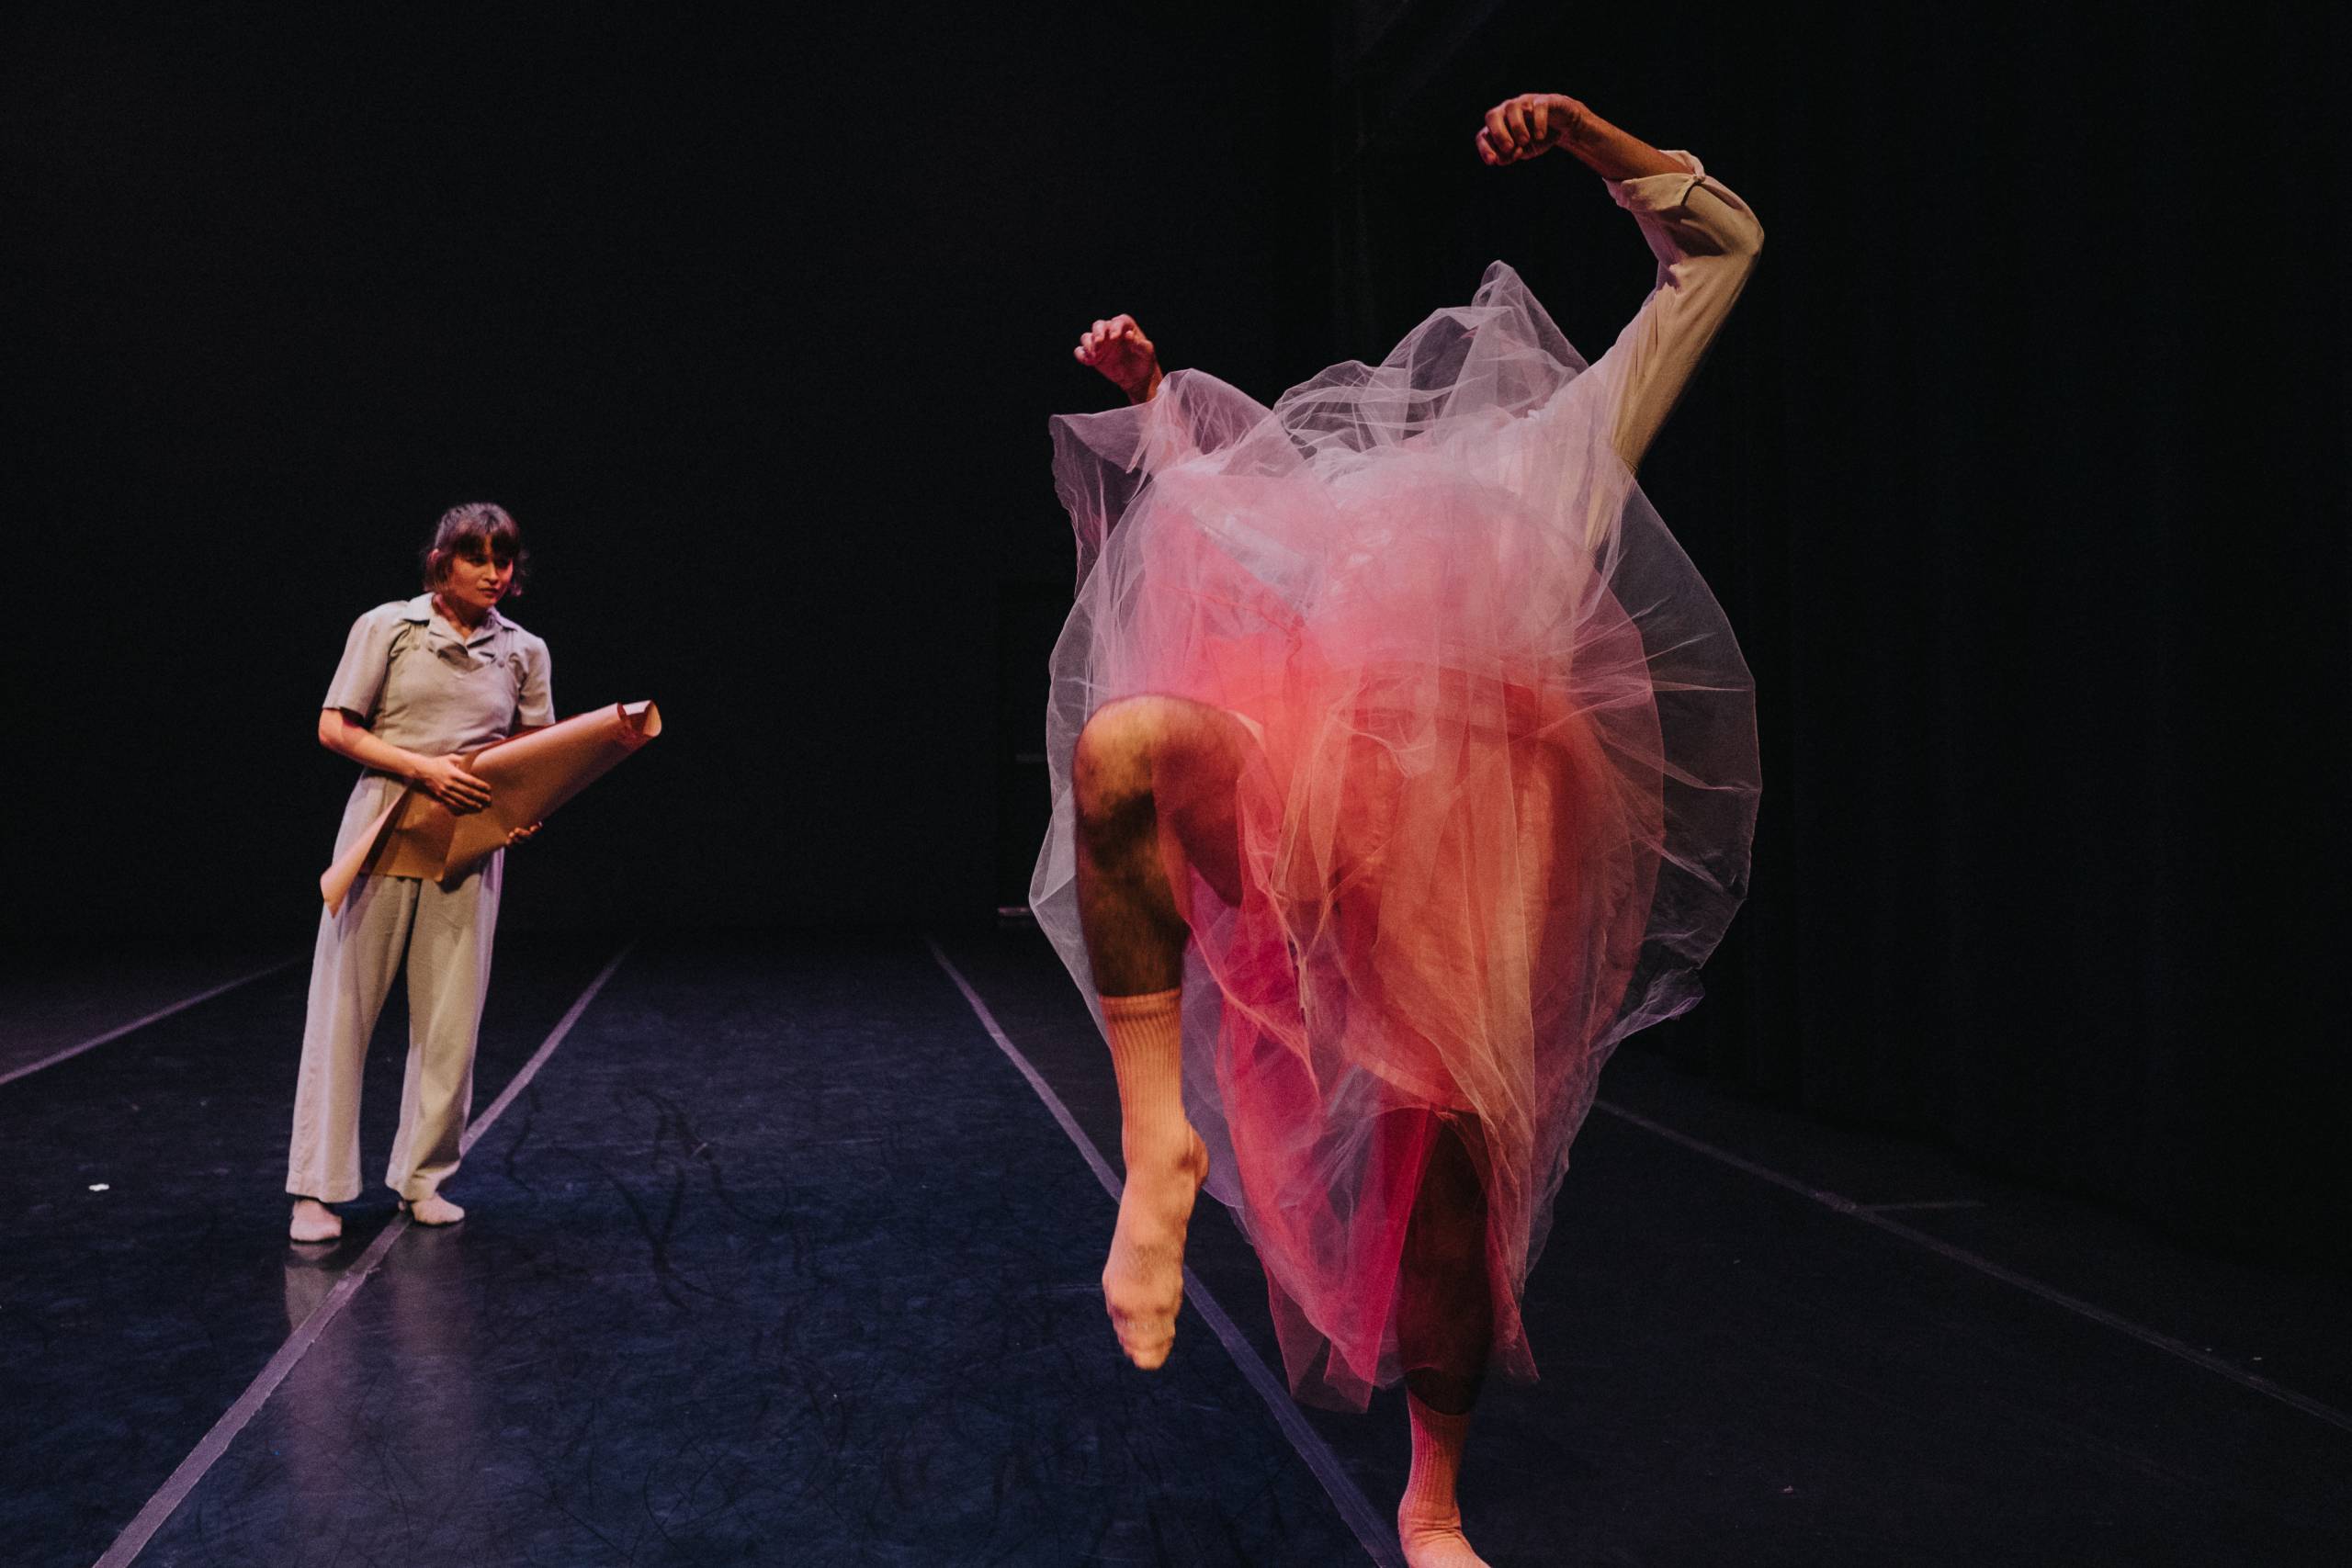 Artist in pink tulle is dancing on stage in front of another performer who is watching them